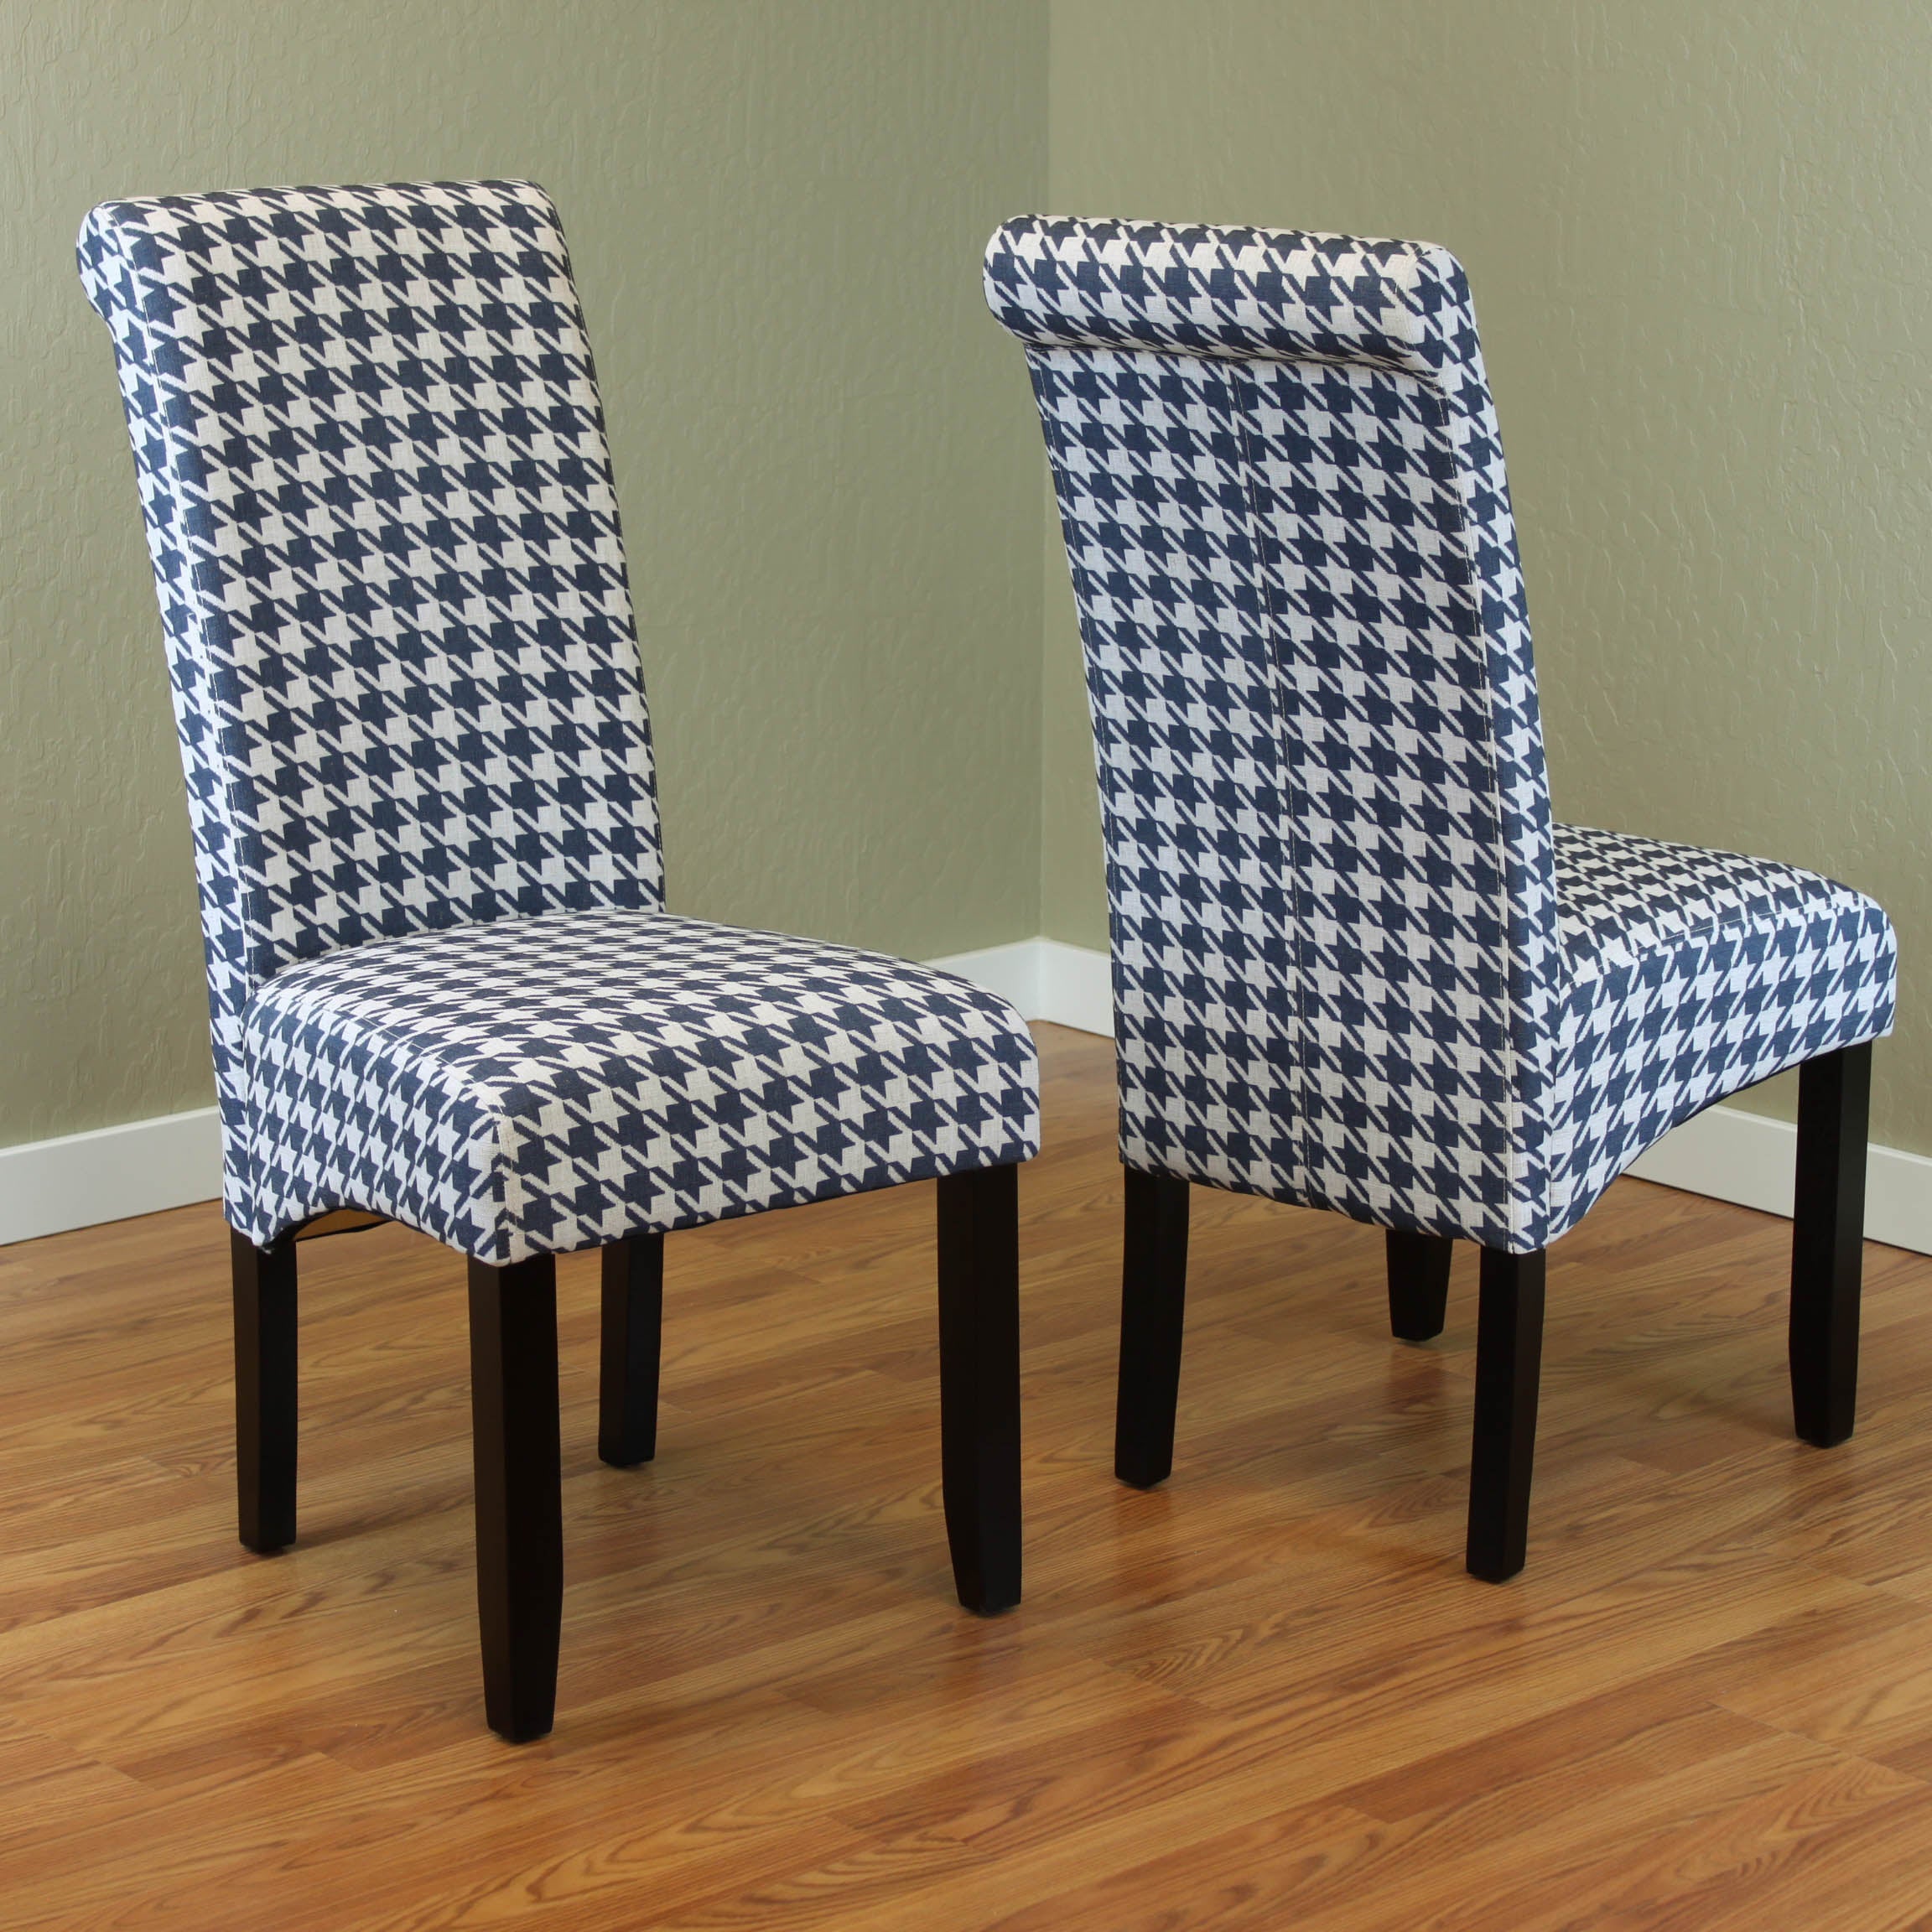 Milan Houndstooth Linen Dining Chairs (Set of 2)